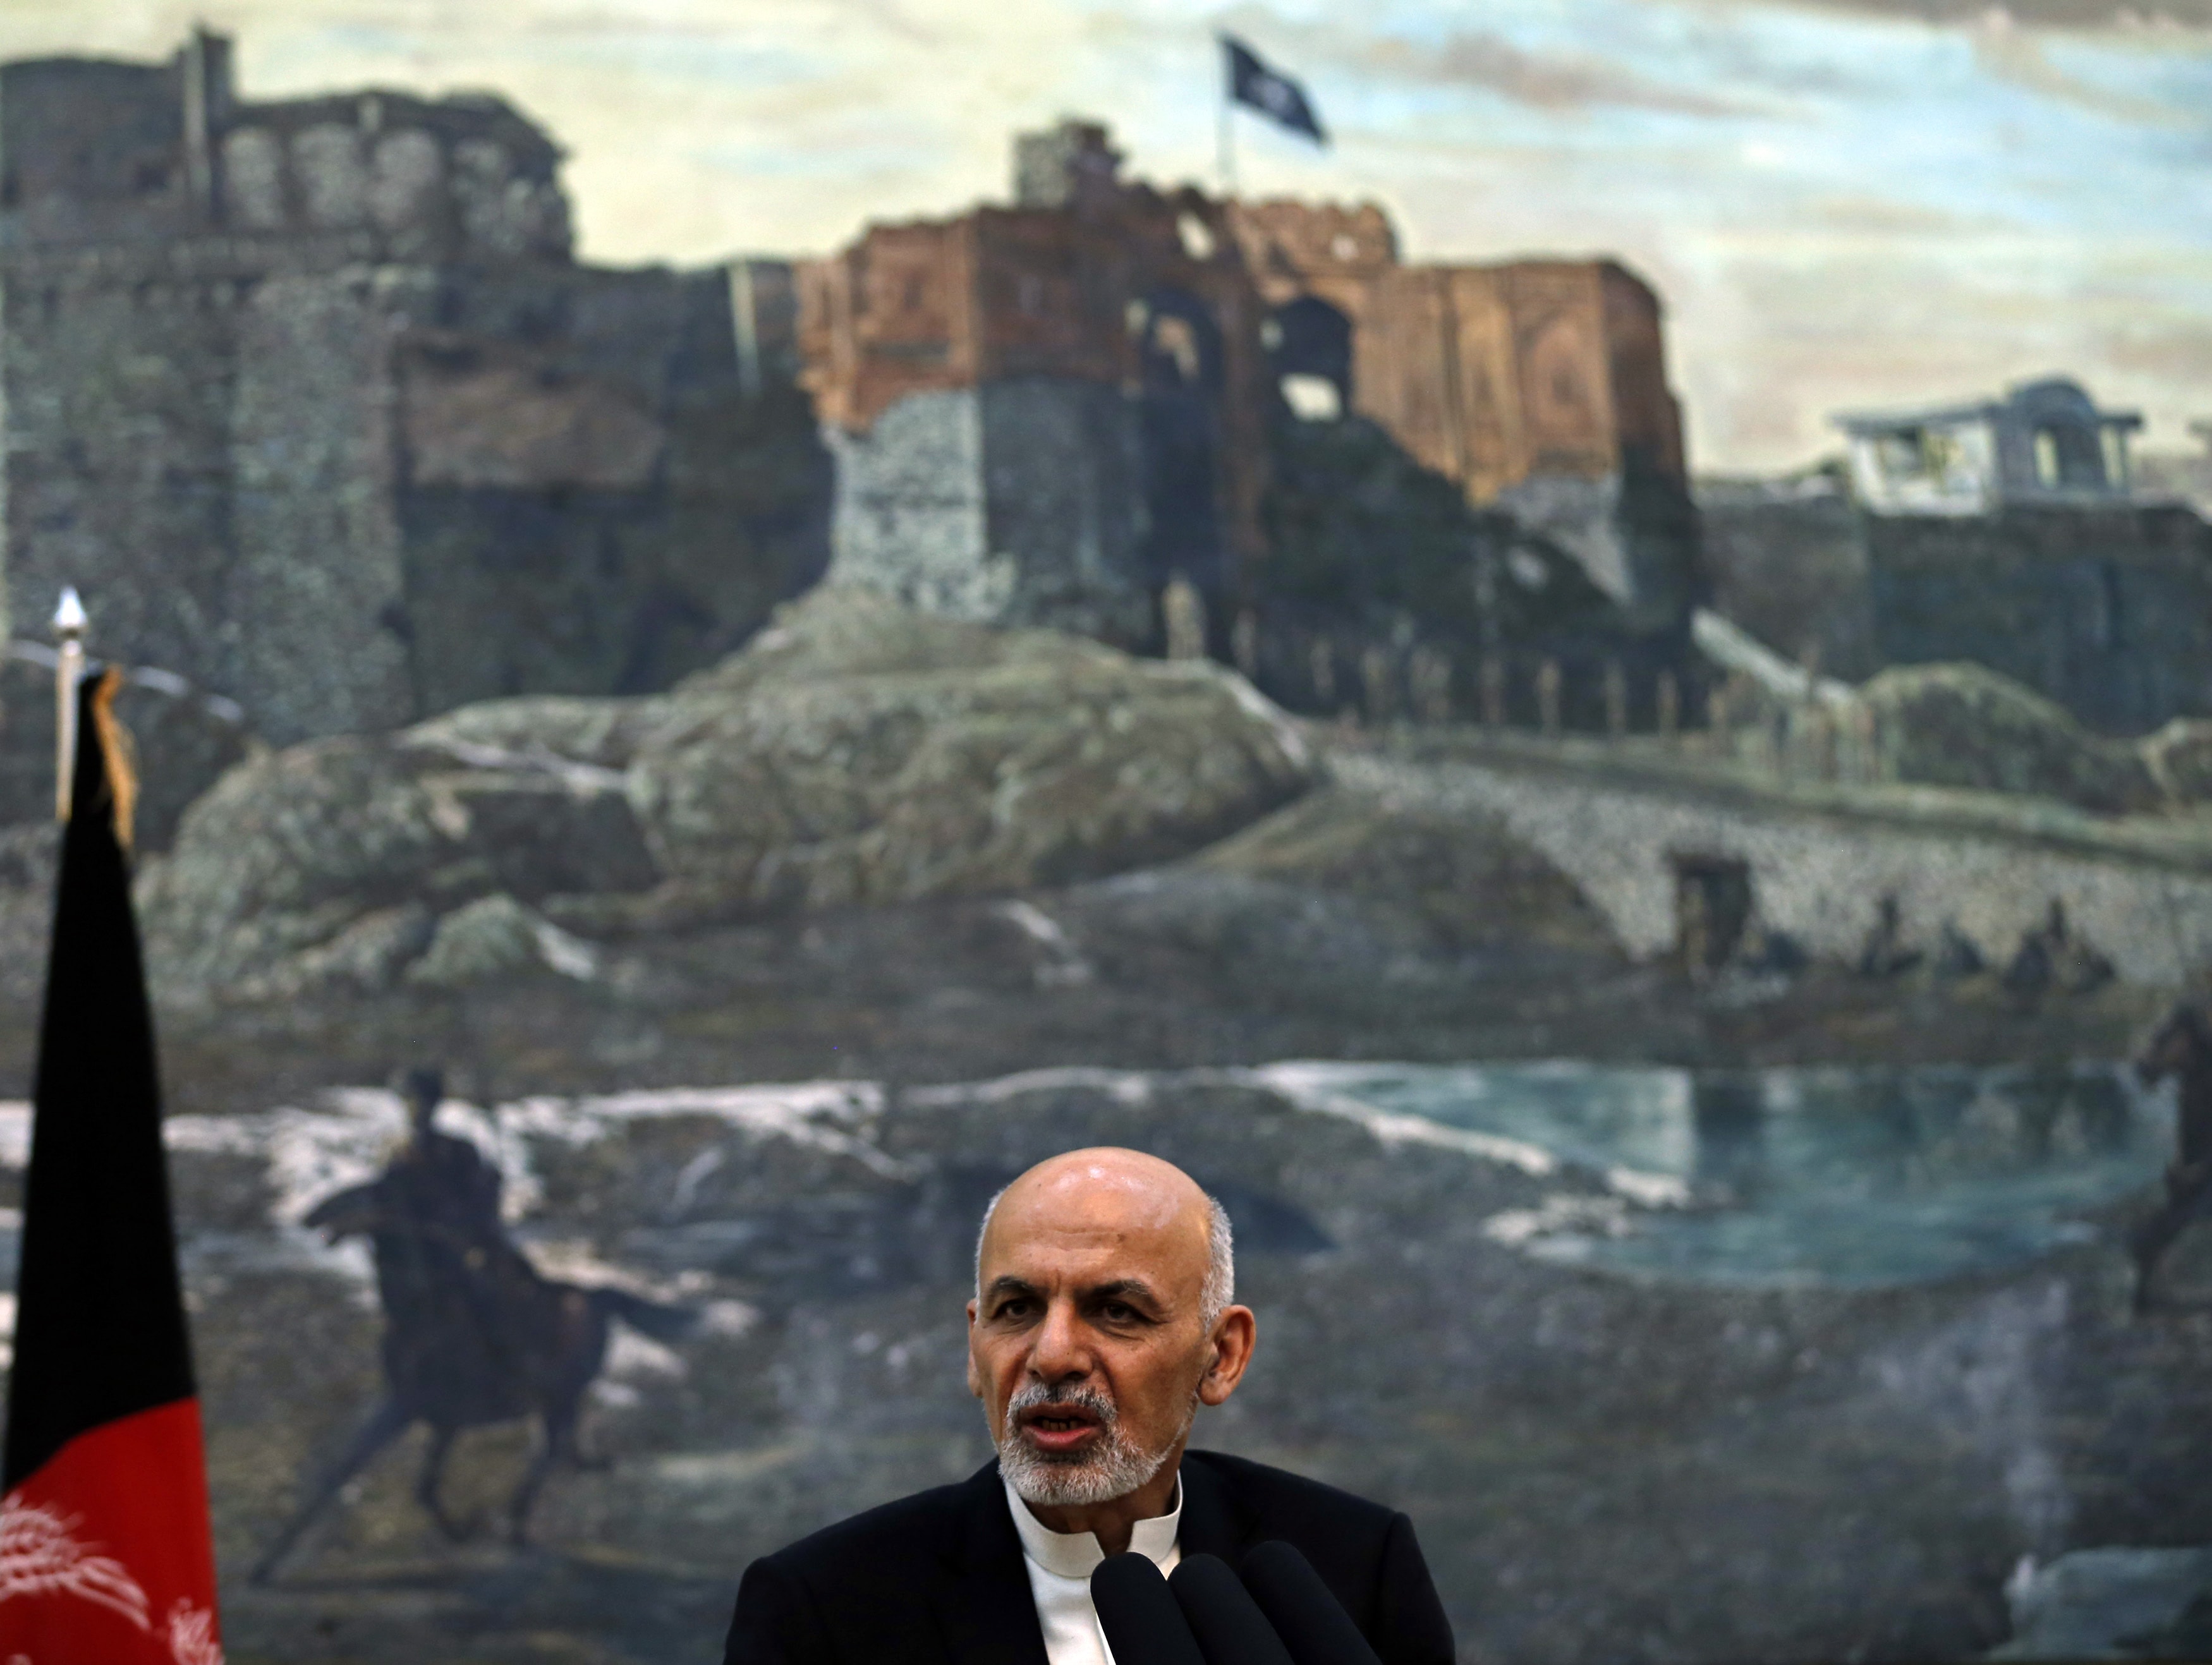 Afghanistan's President Ashraf Ghani speaks during a news conference in Kabul, 1 November 2014, REUTERS/Mohammad Ismail